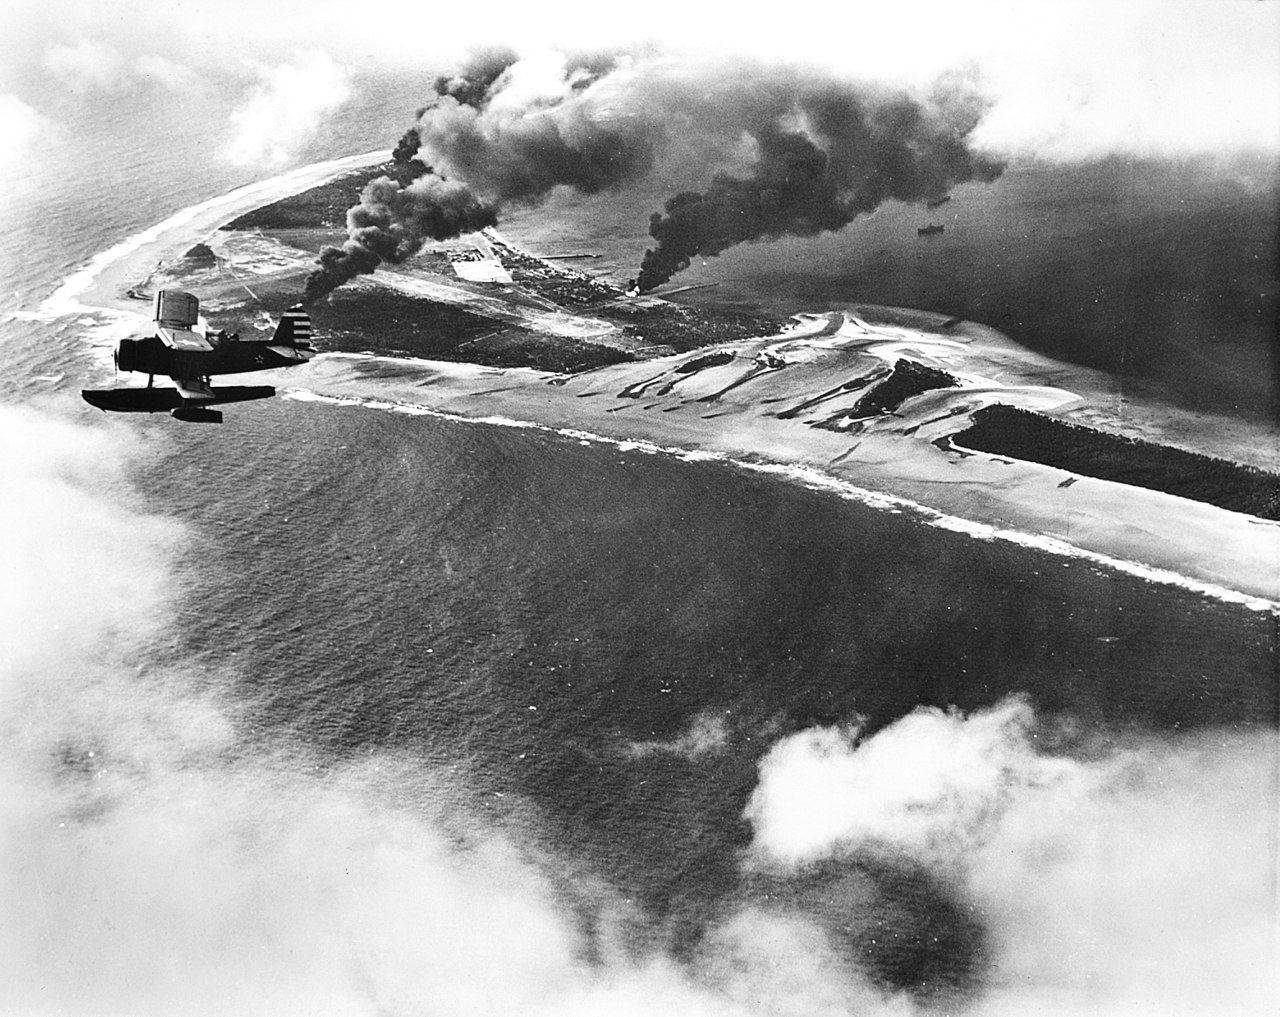 SOC aircraft flew over Wotje Atoll, Marshall Islands, during attack on Japanese airfields by gunfire from cruisers Salt Lake City and Northampton, 1 Feb 1942; note burning ammunition and fuel dumps